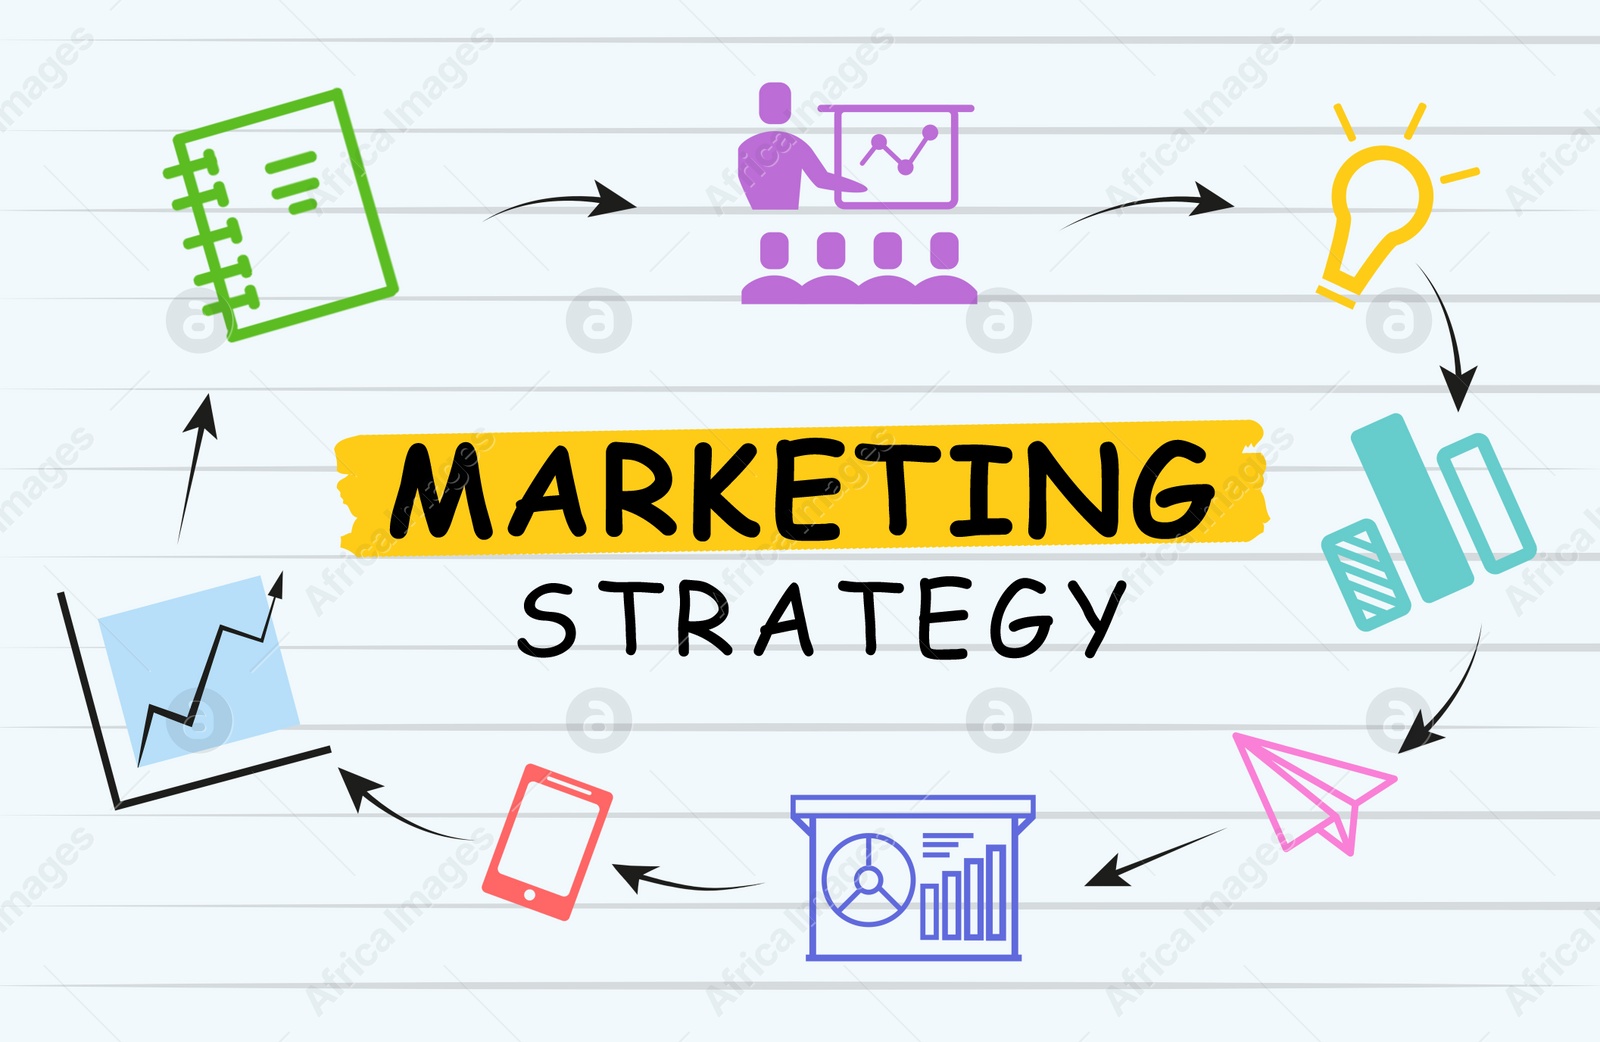 Image of Marketing strategy scheme with illustrations on light background